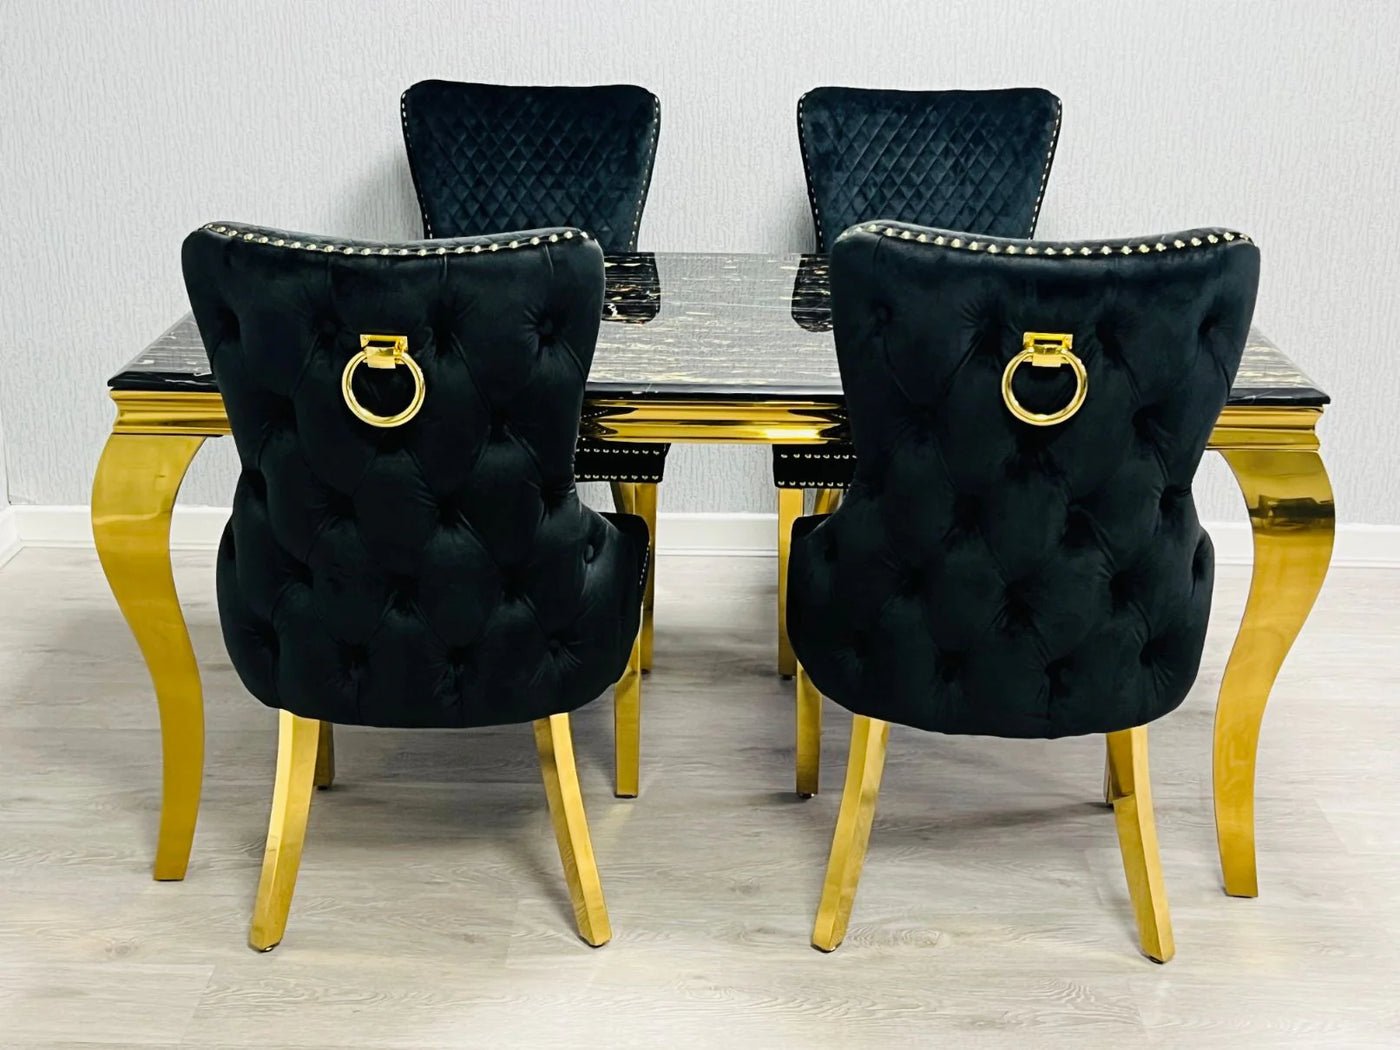 Victoria Gold Ring Knocker Quilted Tufted Plush Velvet Dining Chair Gold Legs - 2 Colours